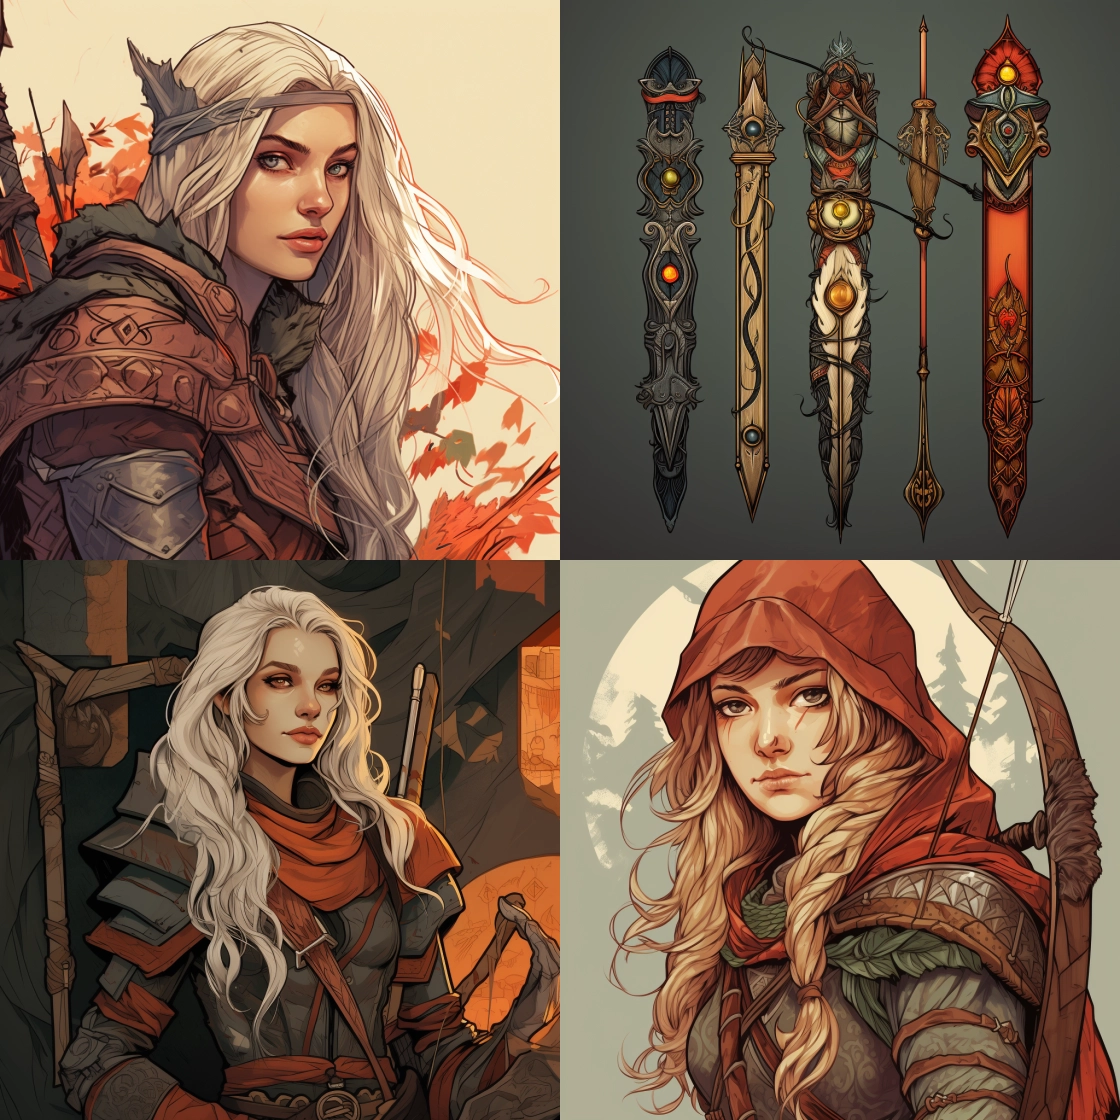 AI characters generated from the prompt 'Viking warrior princess'